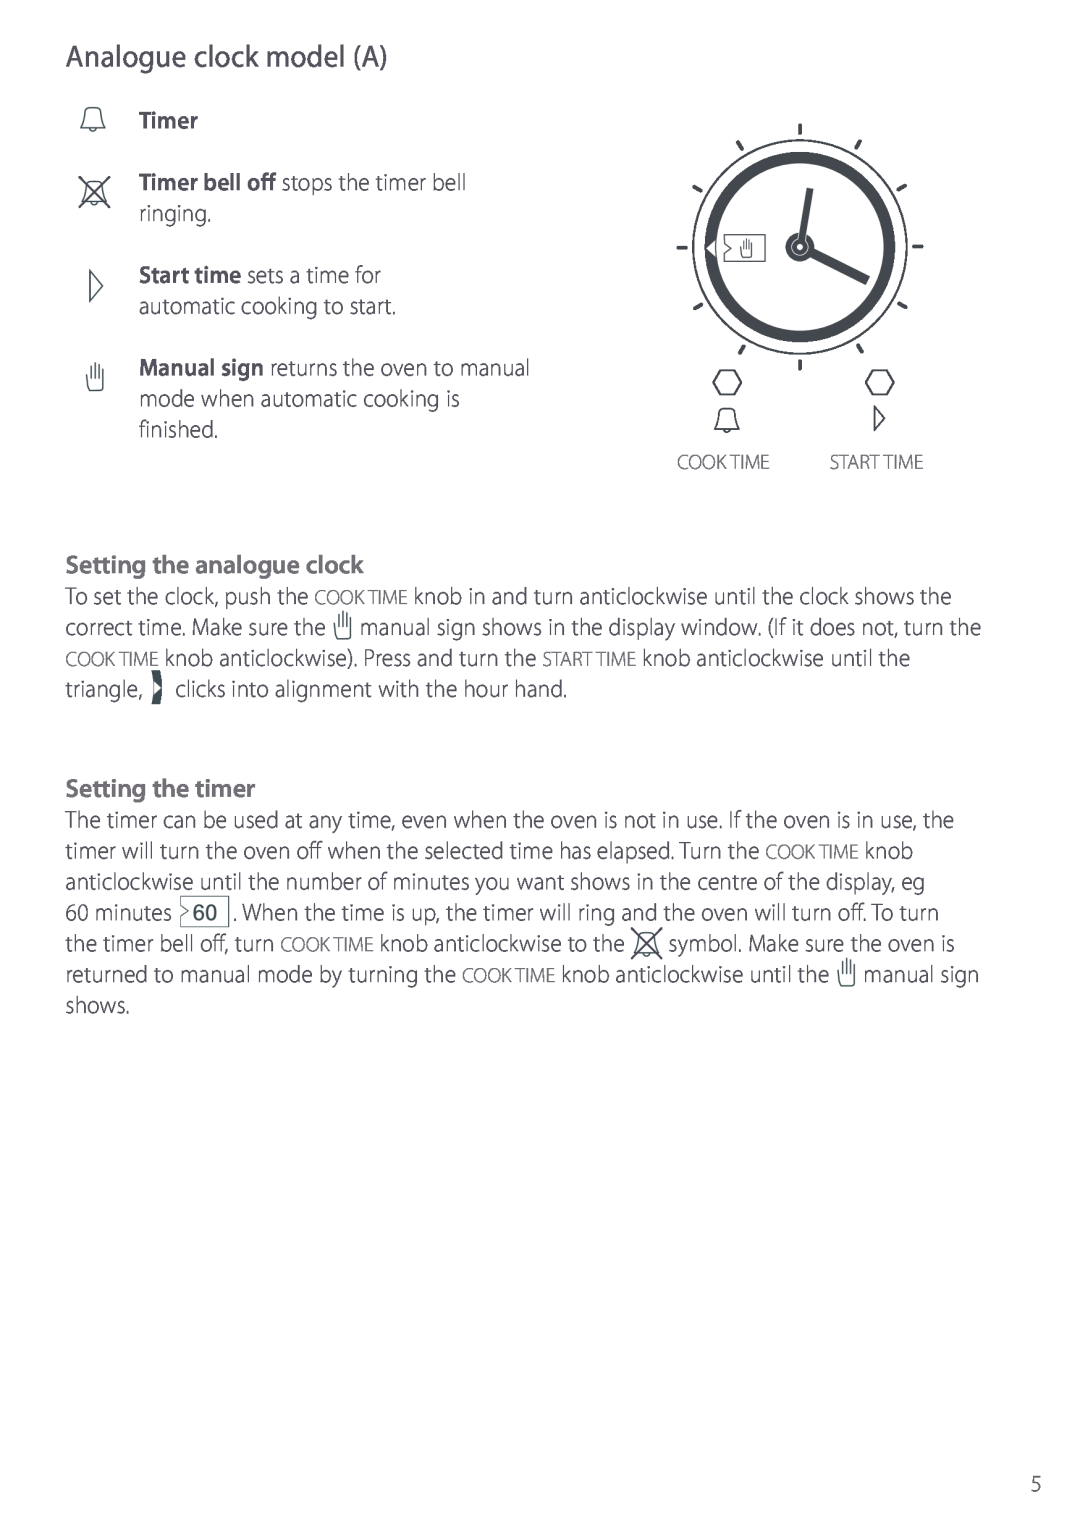 Fisher & Paykel BI452 manual Analogue clock model A, Timer Timer bell off stops the timer bell ringing, Setting the timer 